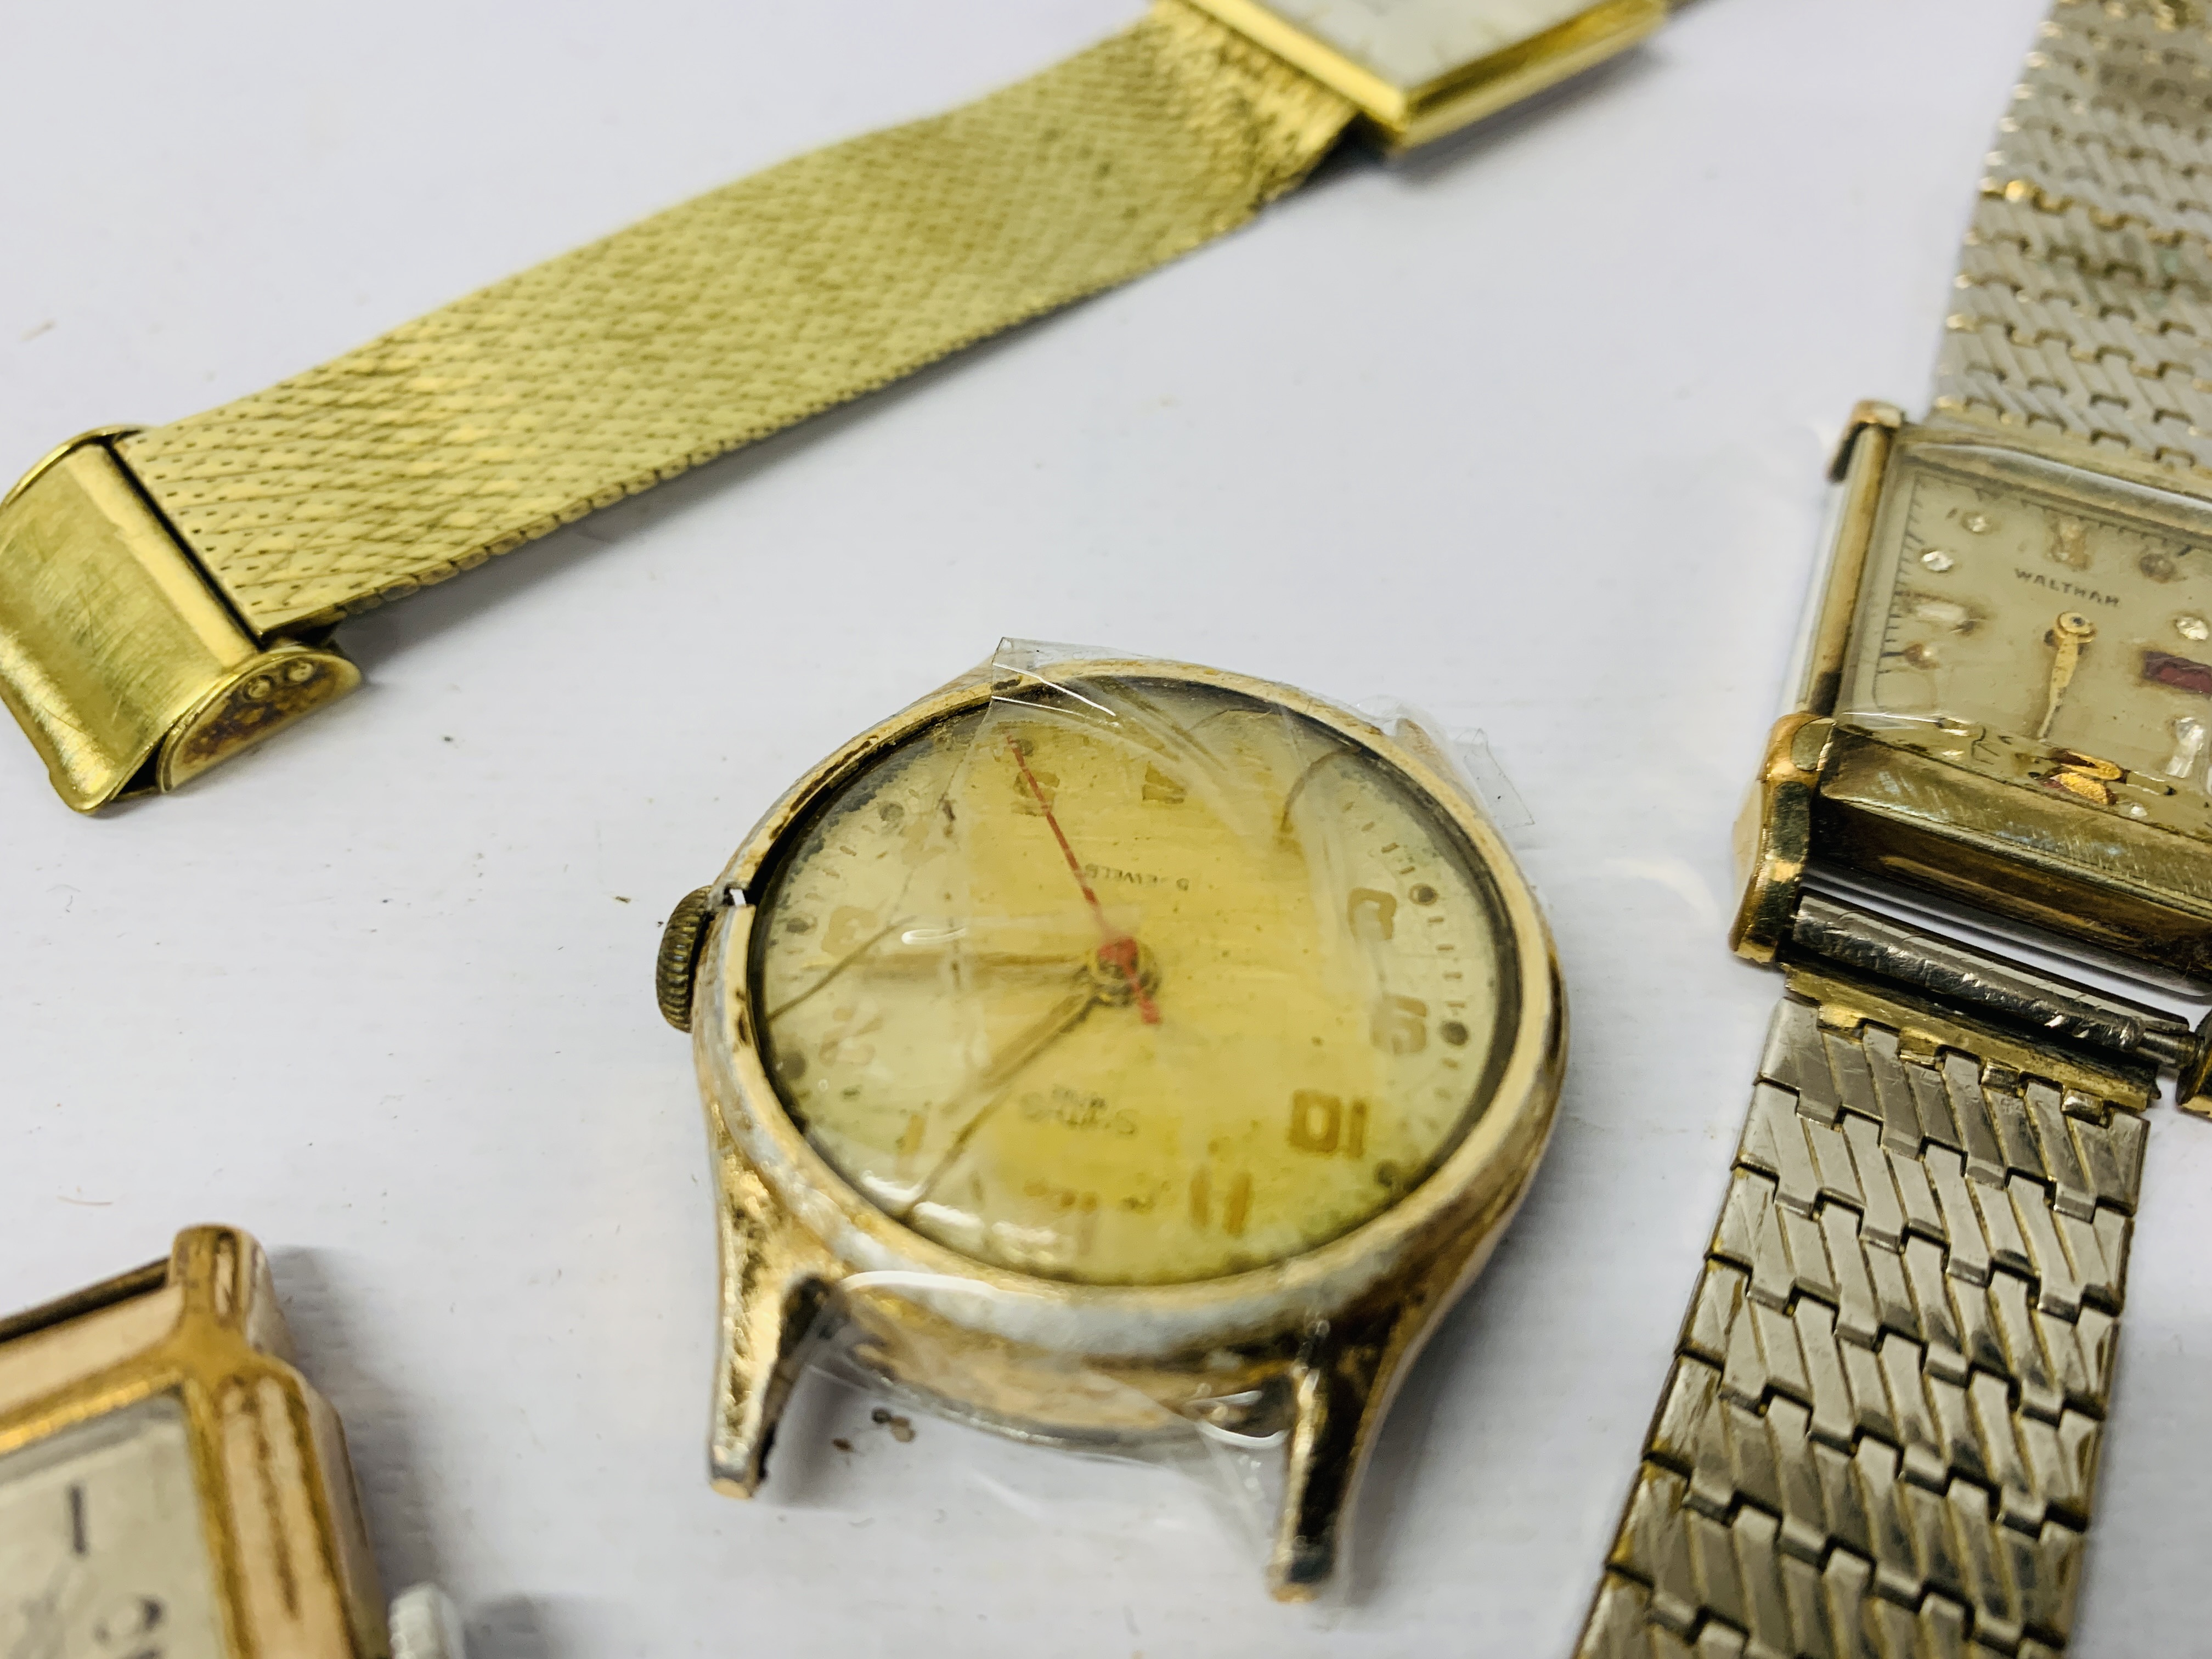 7 X ASSORTED WATCHES / FACES TO INCLUDE WALTHAM - OCEANIC ACCURIST SEKONDA ETC. - Image 5 of 8